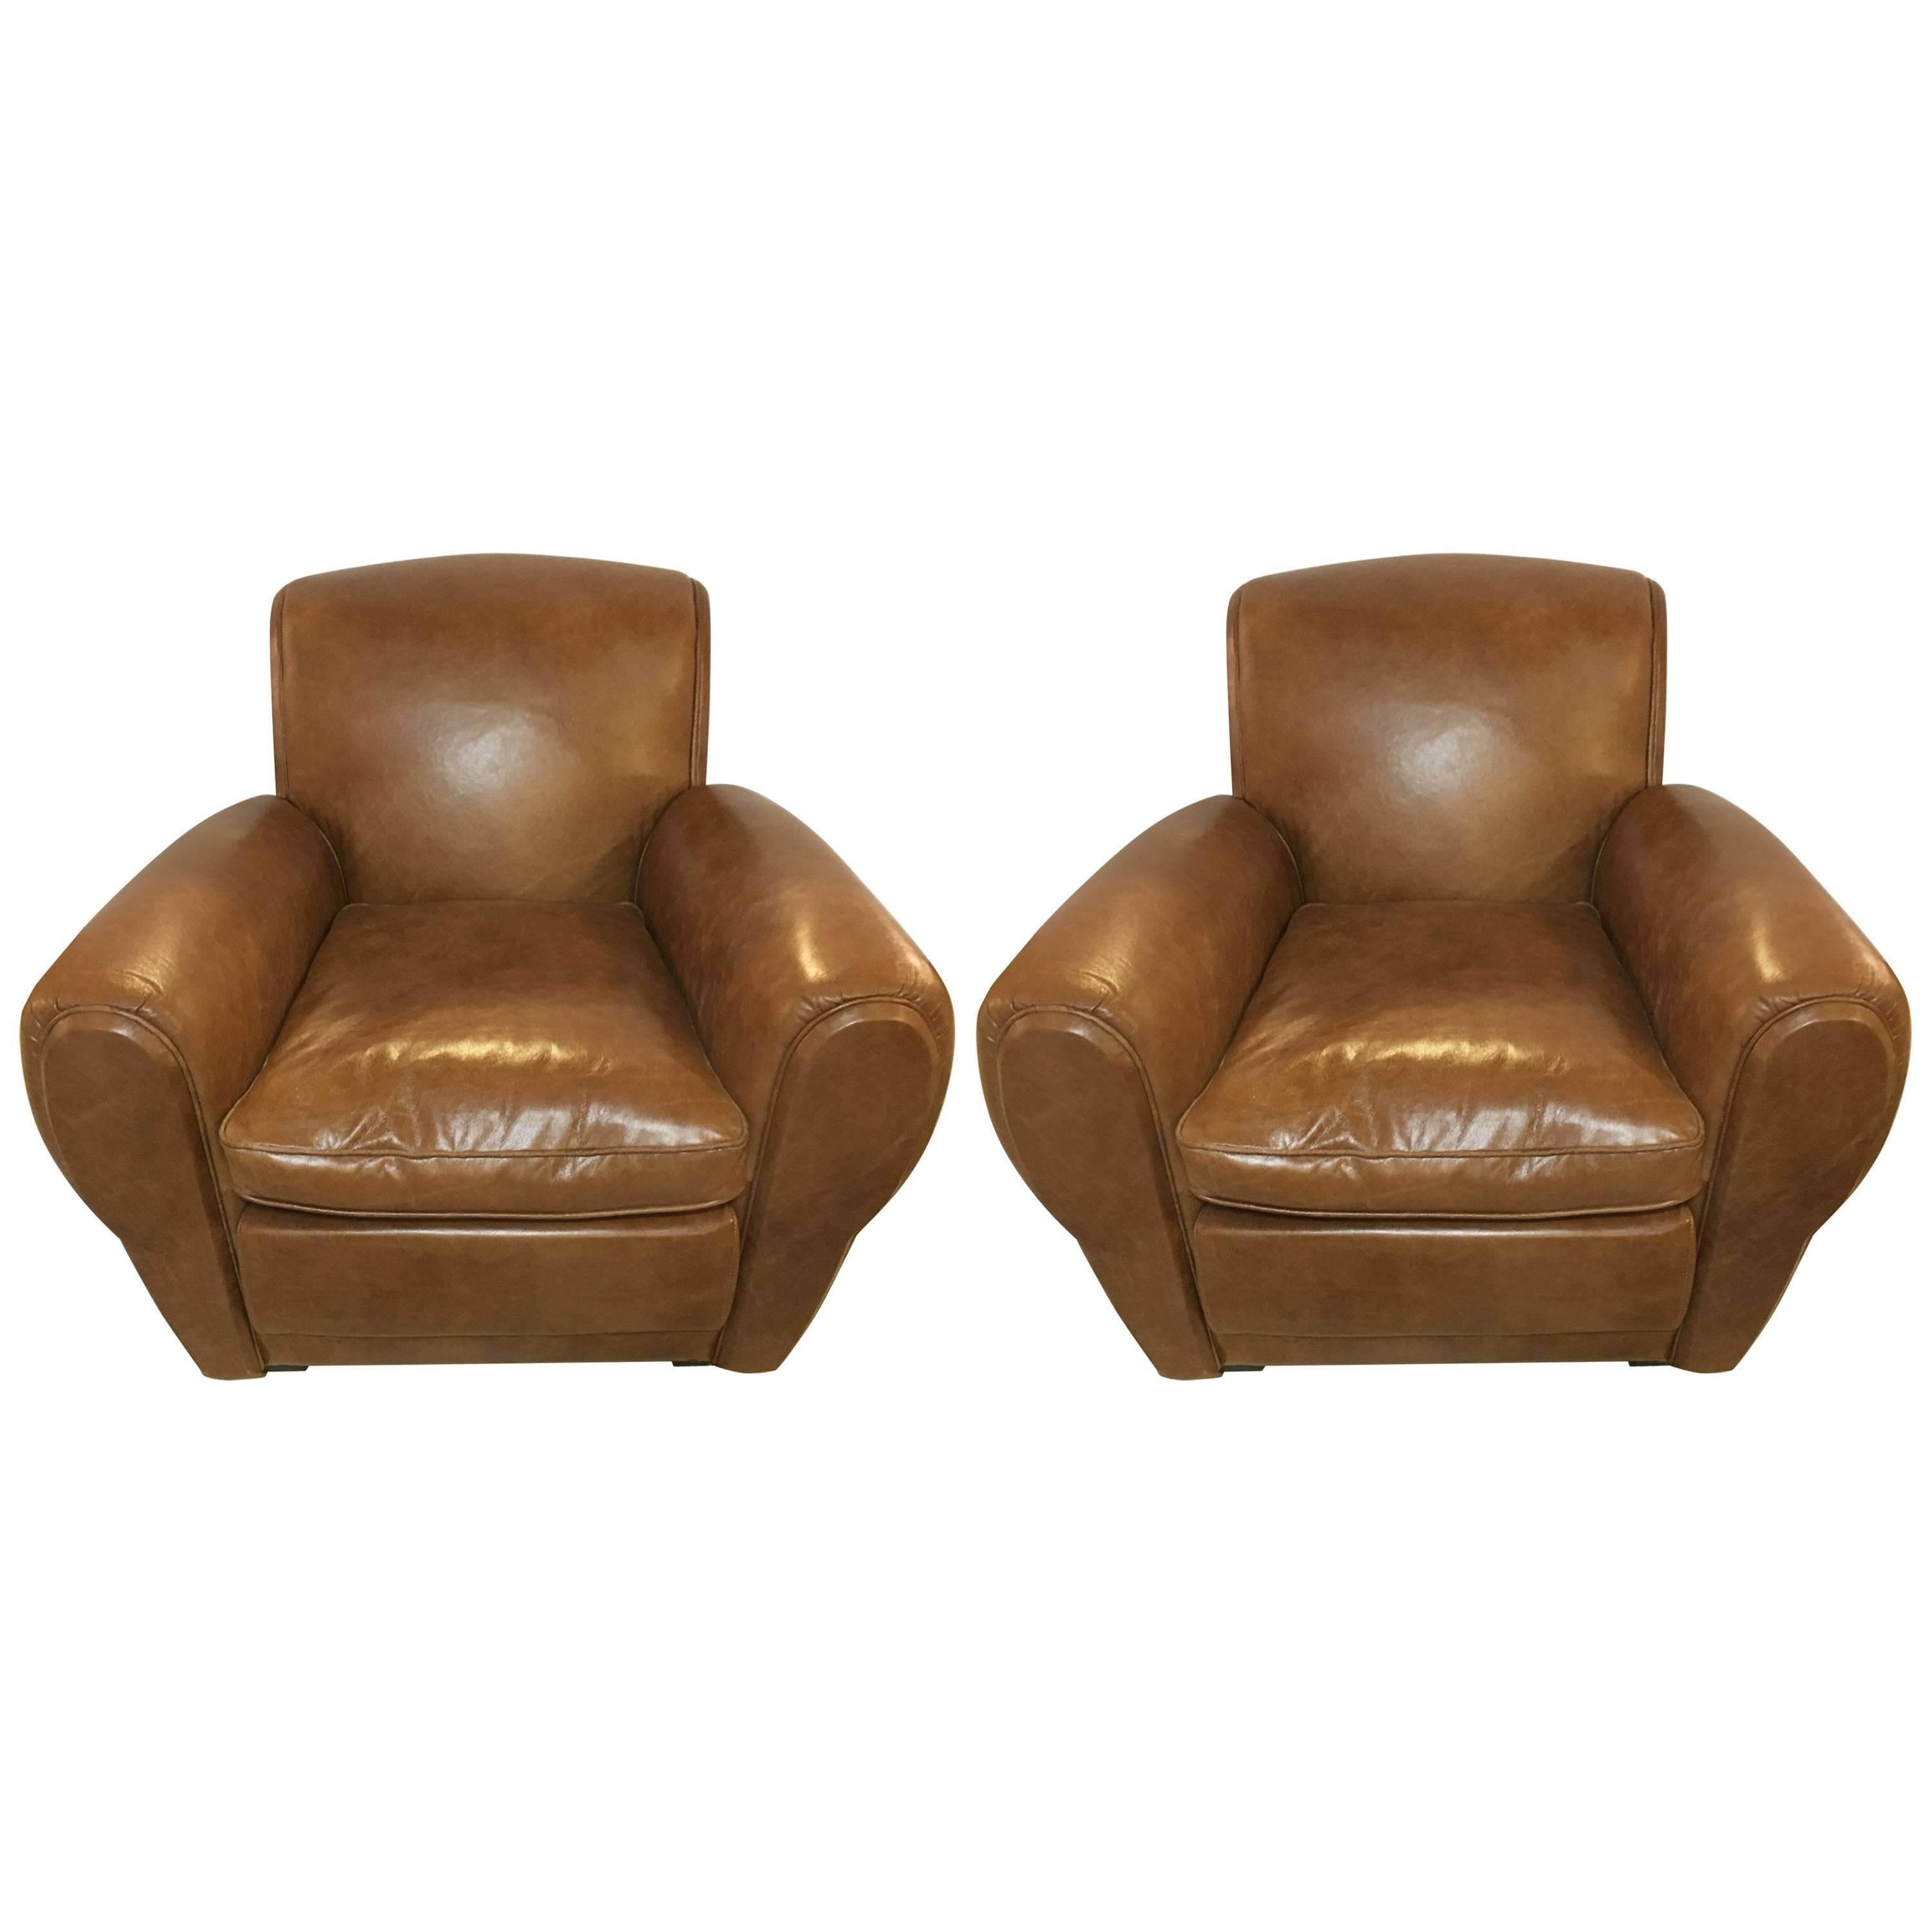 Pair of Fine Worn Leather Cabaret Chairs